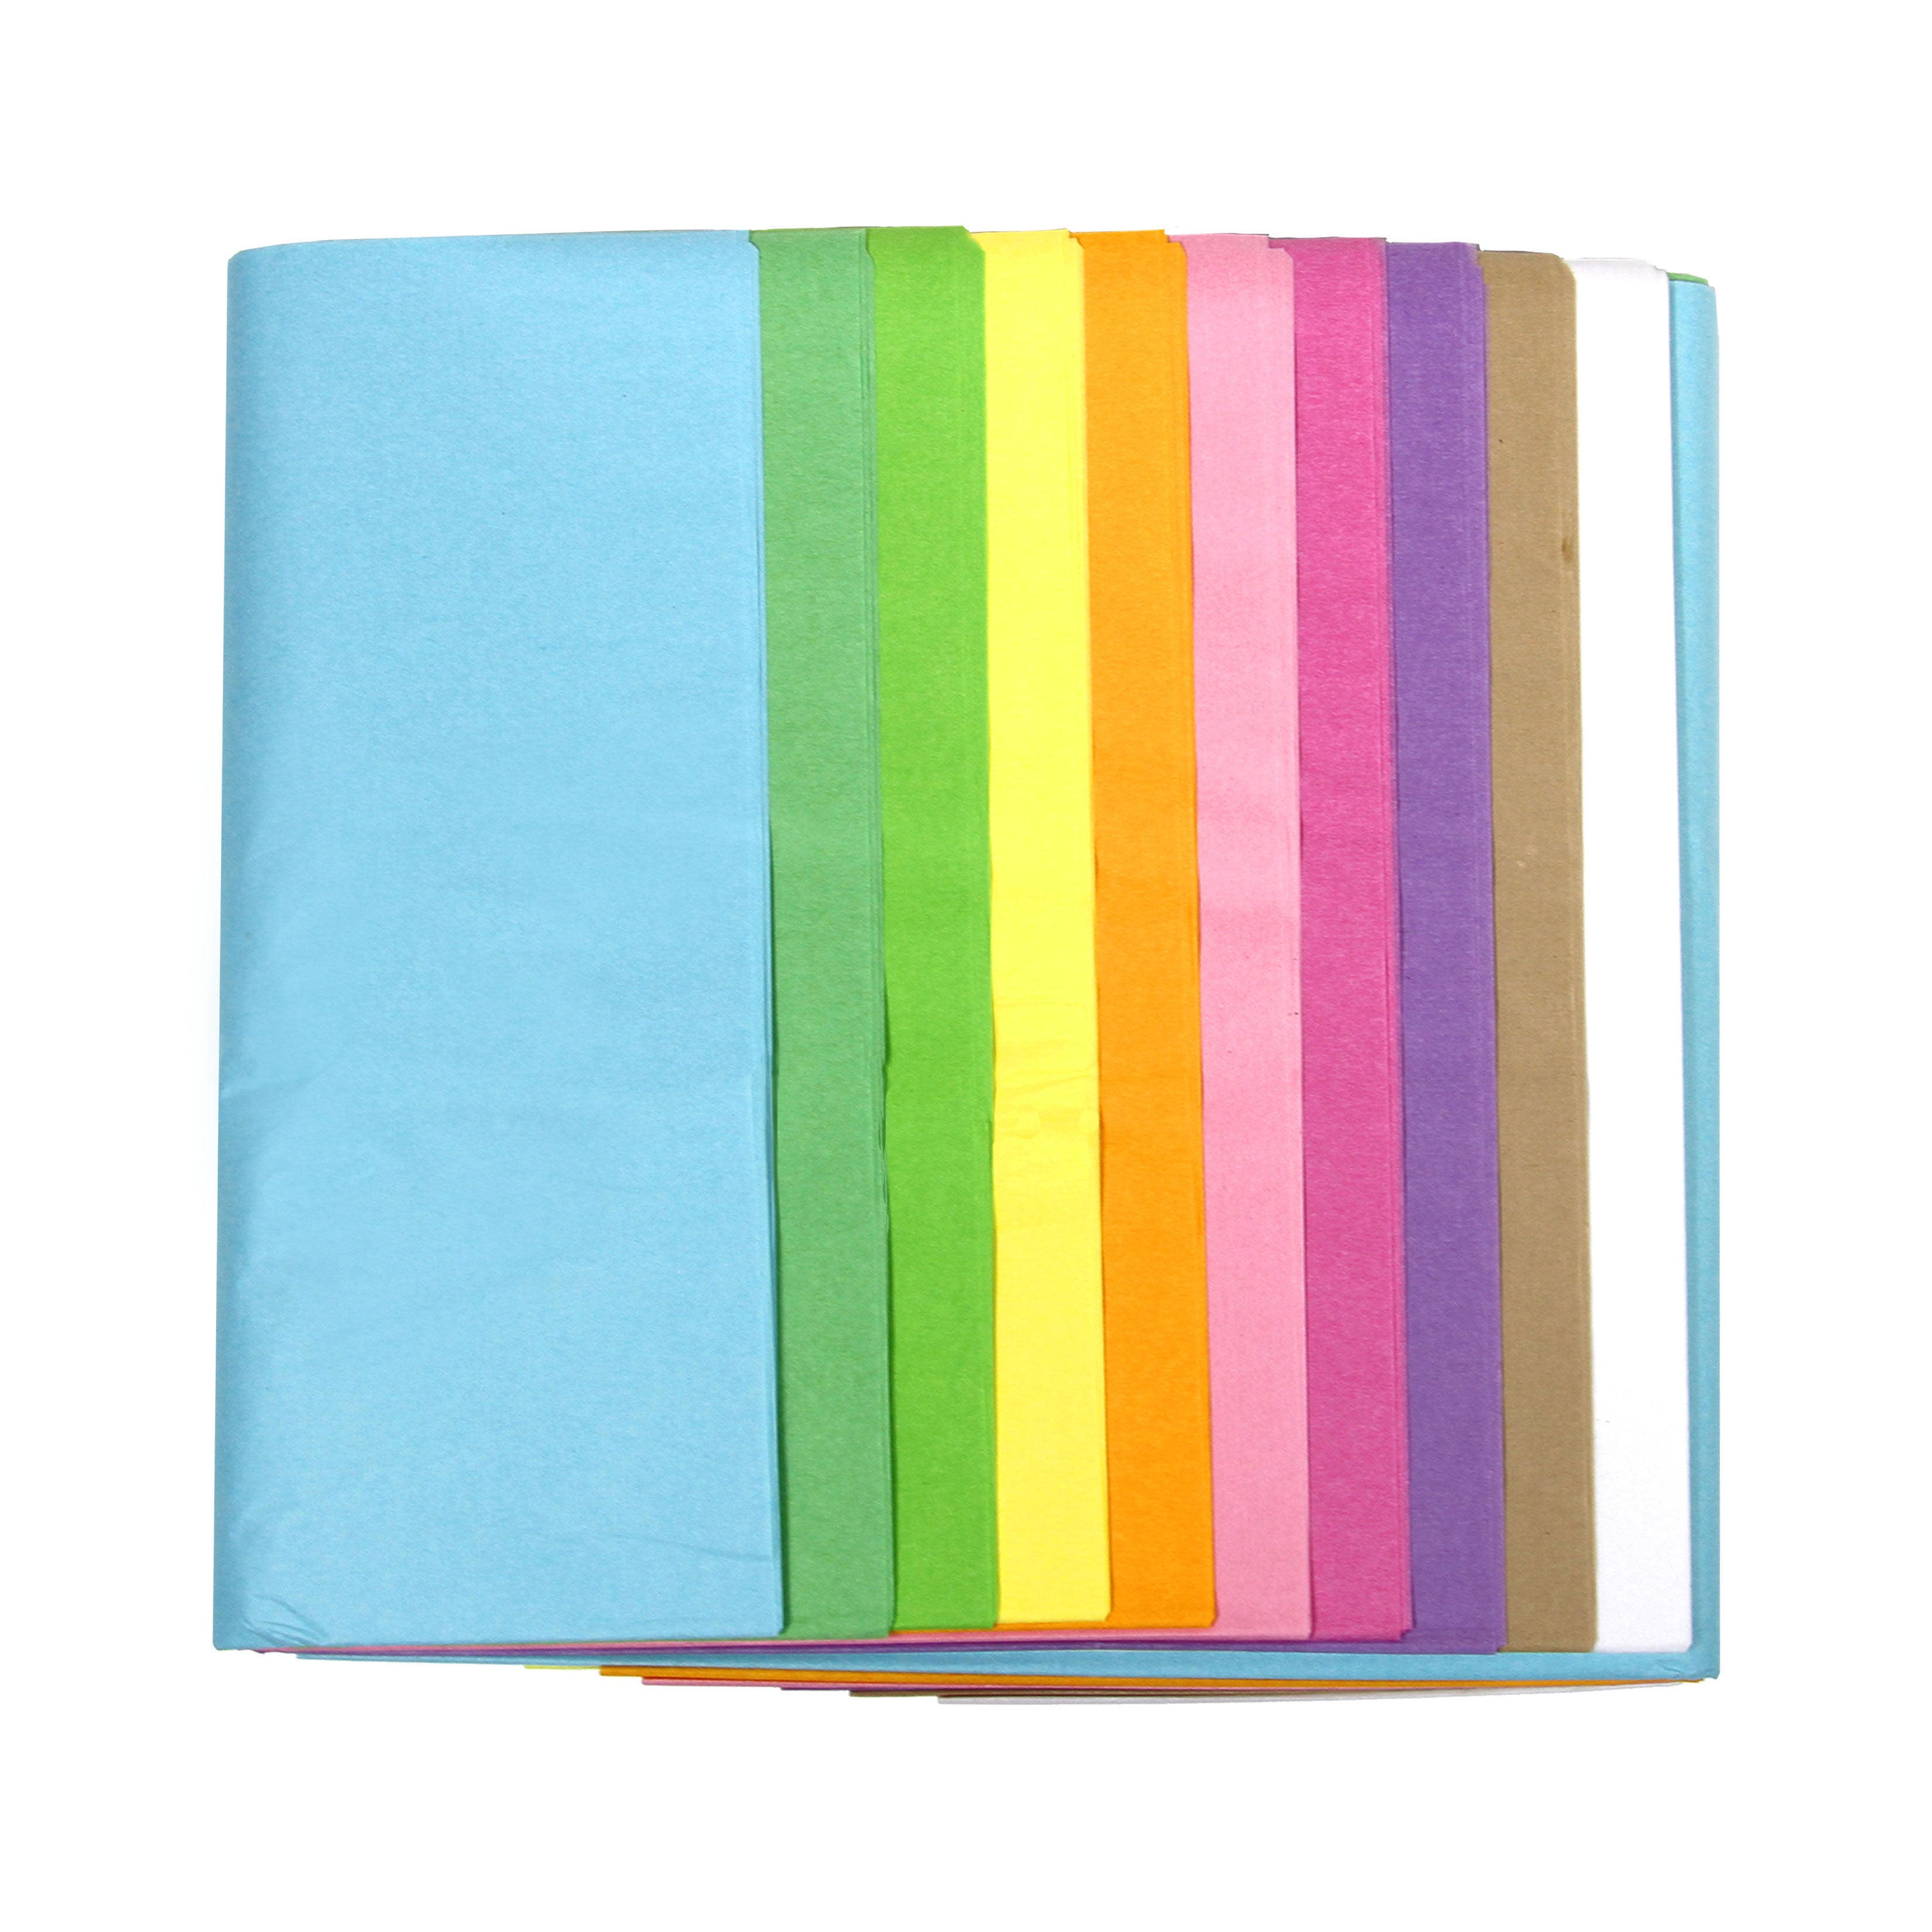 Simetufy 60 Sheets Tissue Paper for Gift Bags, 10 Pastel Colored